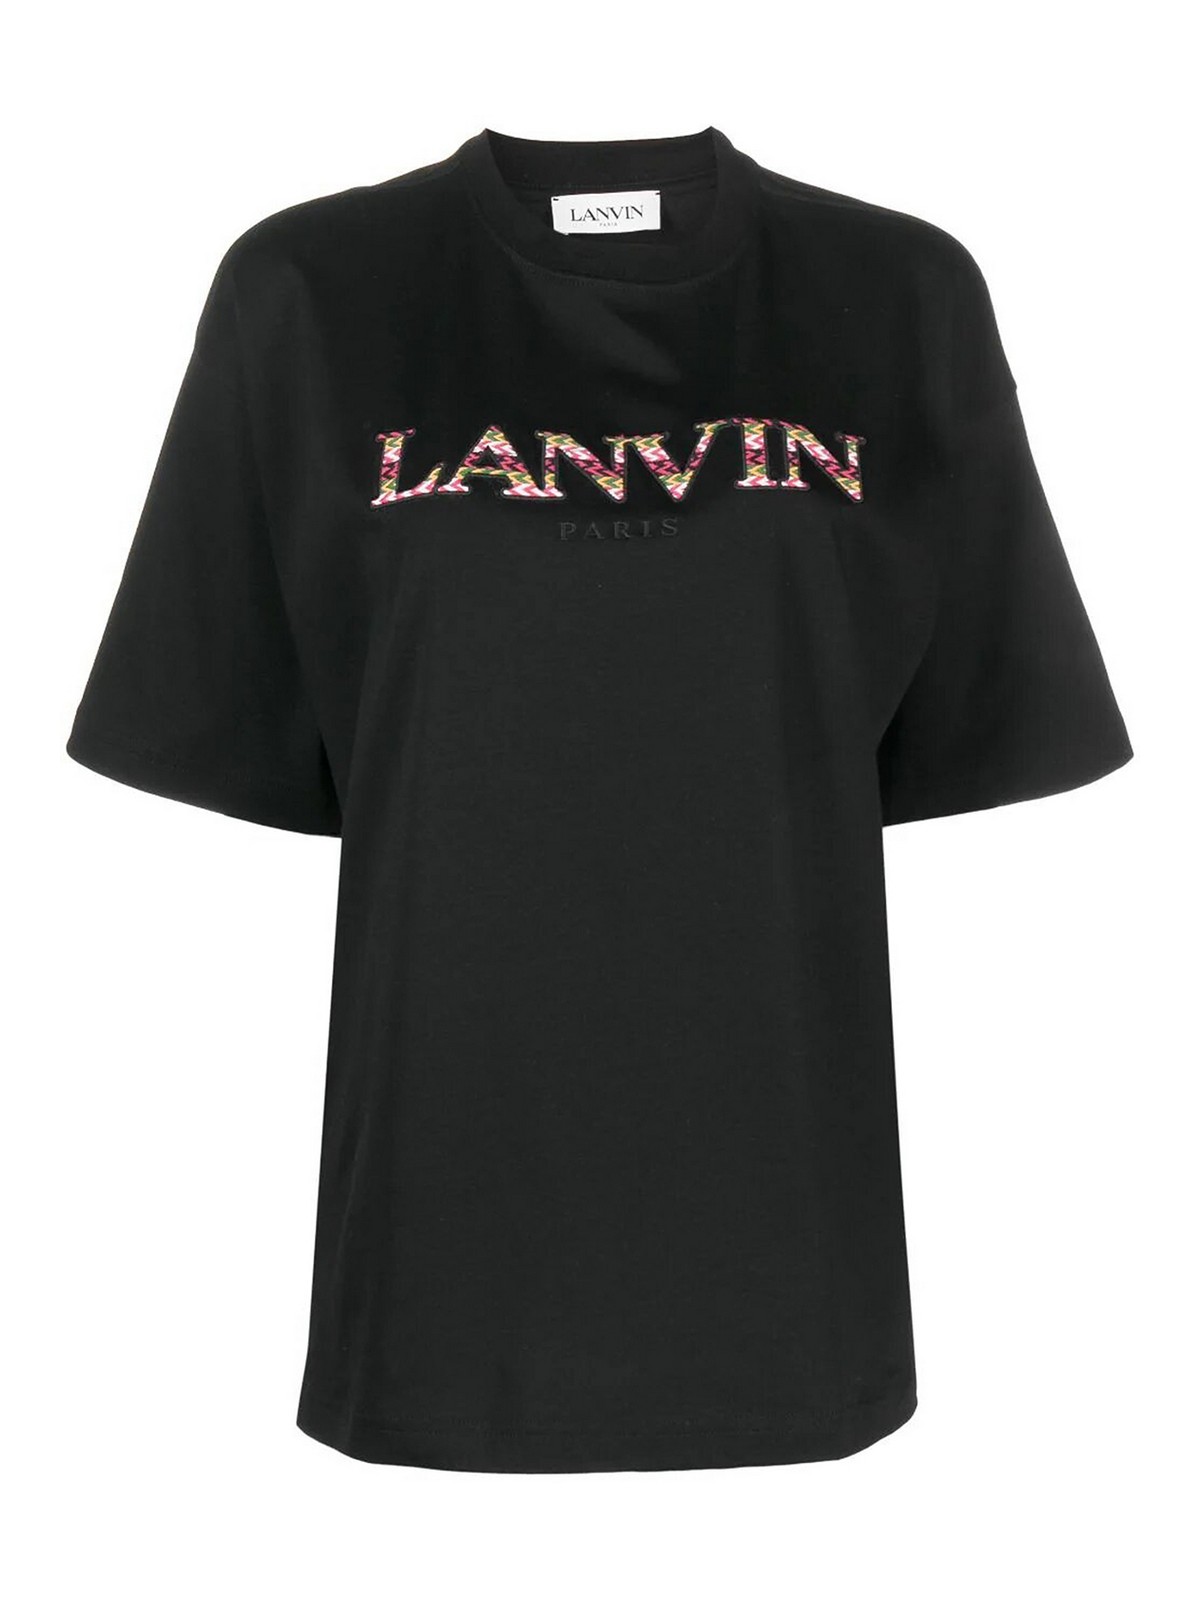 Lanvin Embroidered Logo Tee In Black